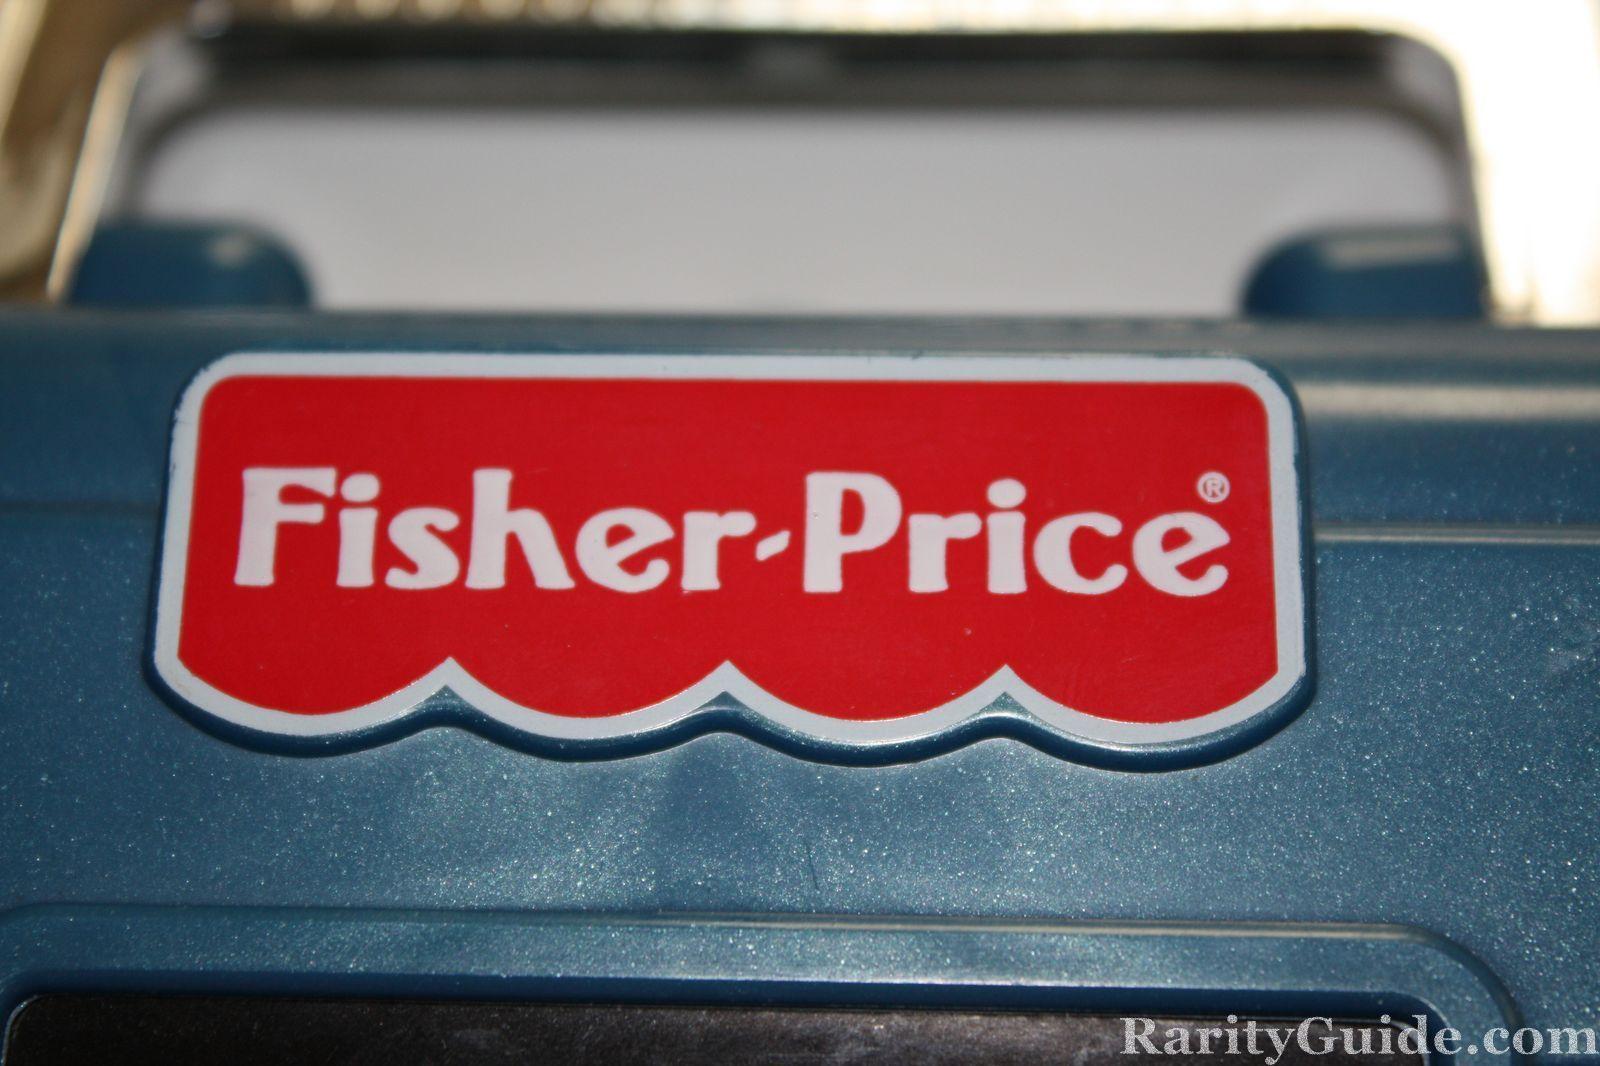 Fisher-Price Logo - RarityGuide.com Museum: Toys - Doctors, Medical » Fisher Price ...